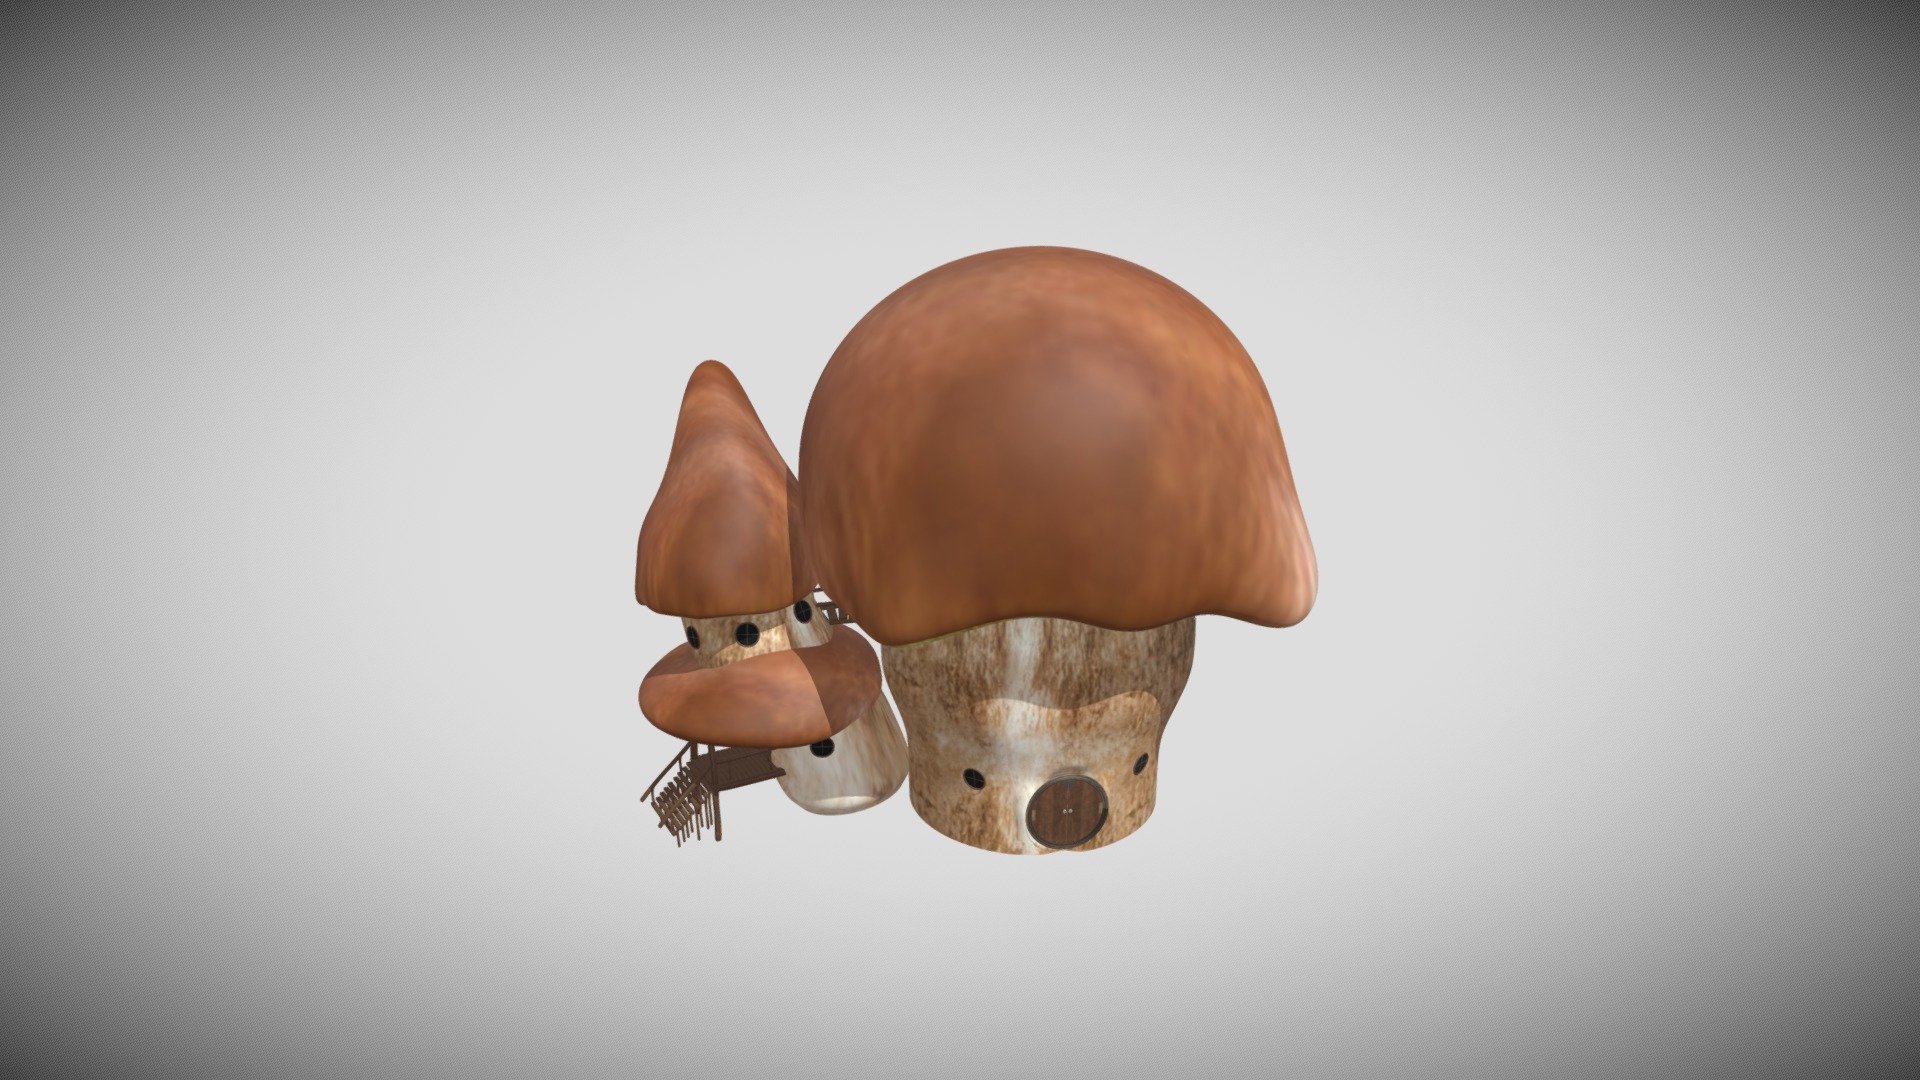 3d model of a mushroom 

this is my little mushroom house of my imagination
low-poly 3d model - Mushroom house - 3D model by domca-3 3d model